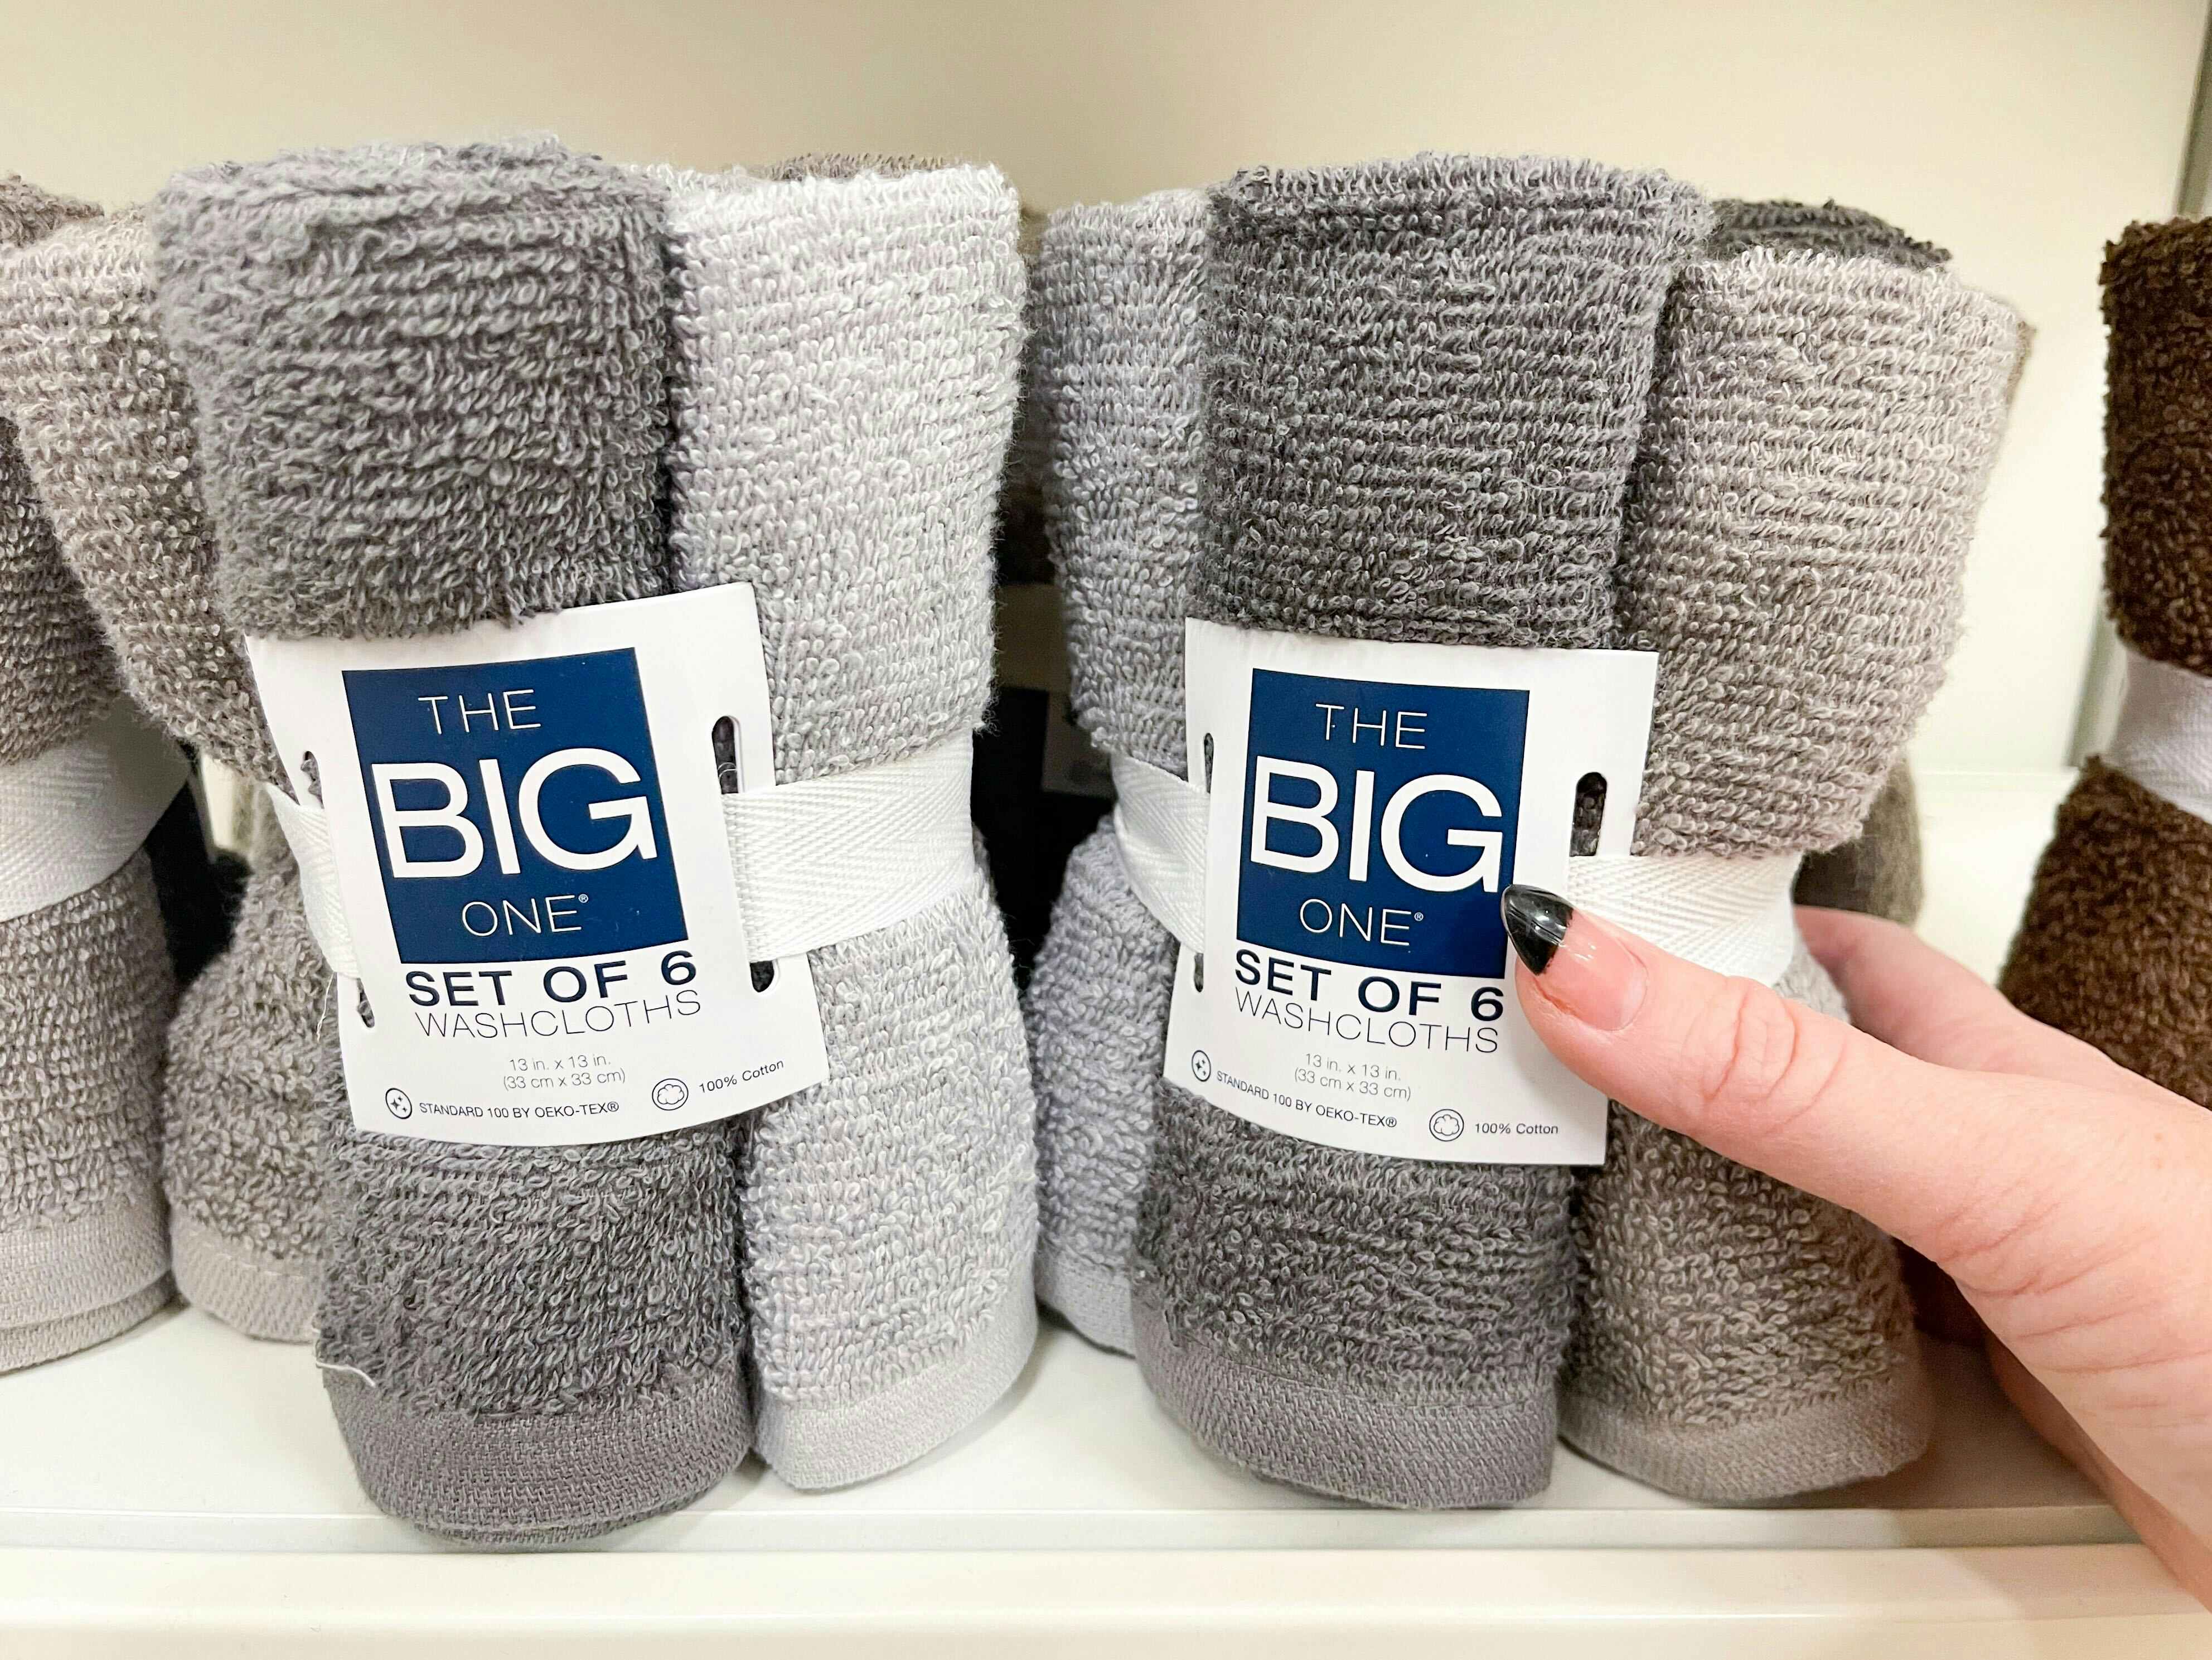 kohls the big one washcloth 6 pack in store image 2022